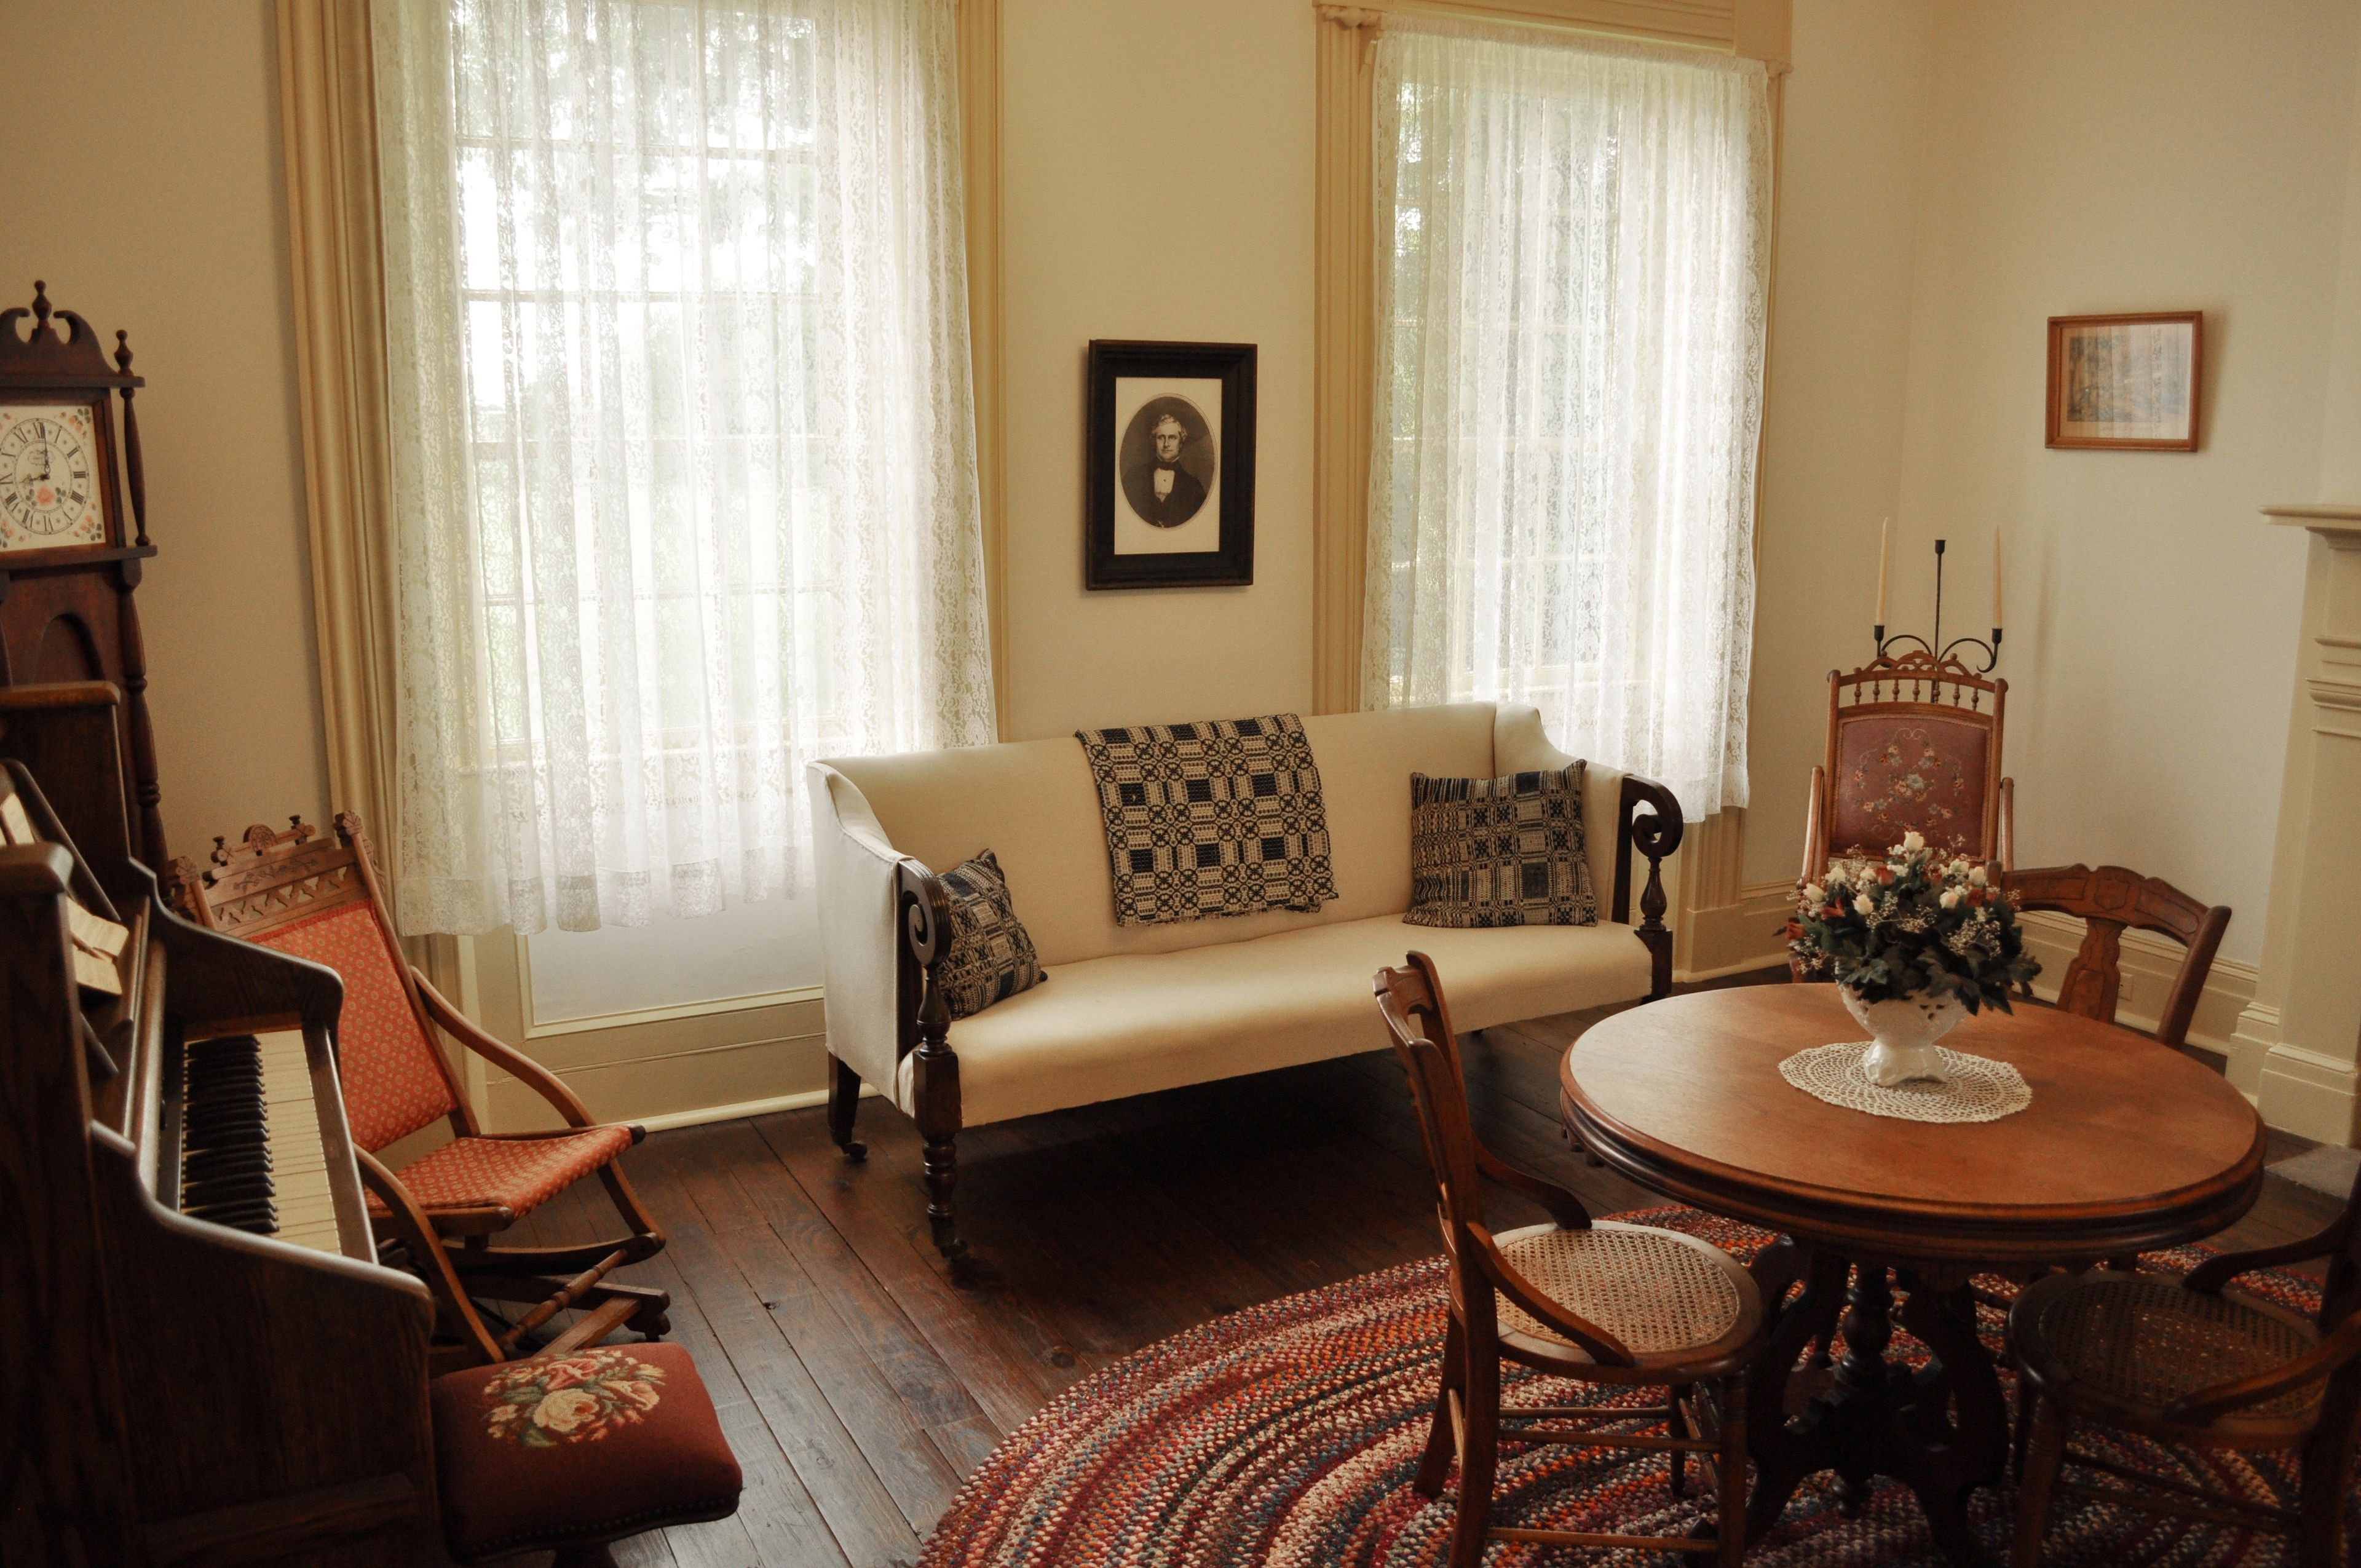 An inside look at the John Taylor home in Nauvoo, Illinois.